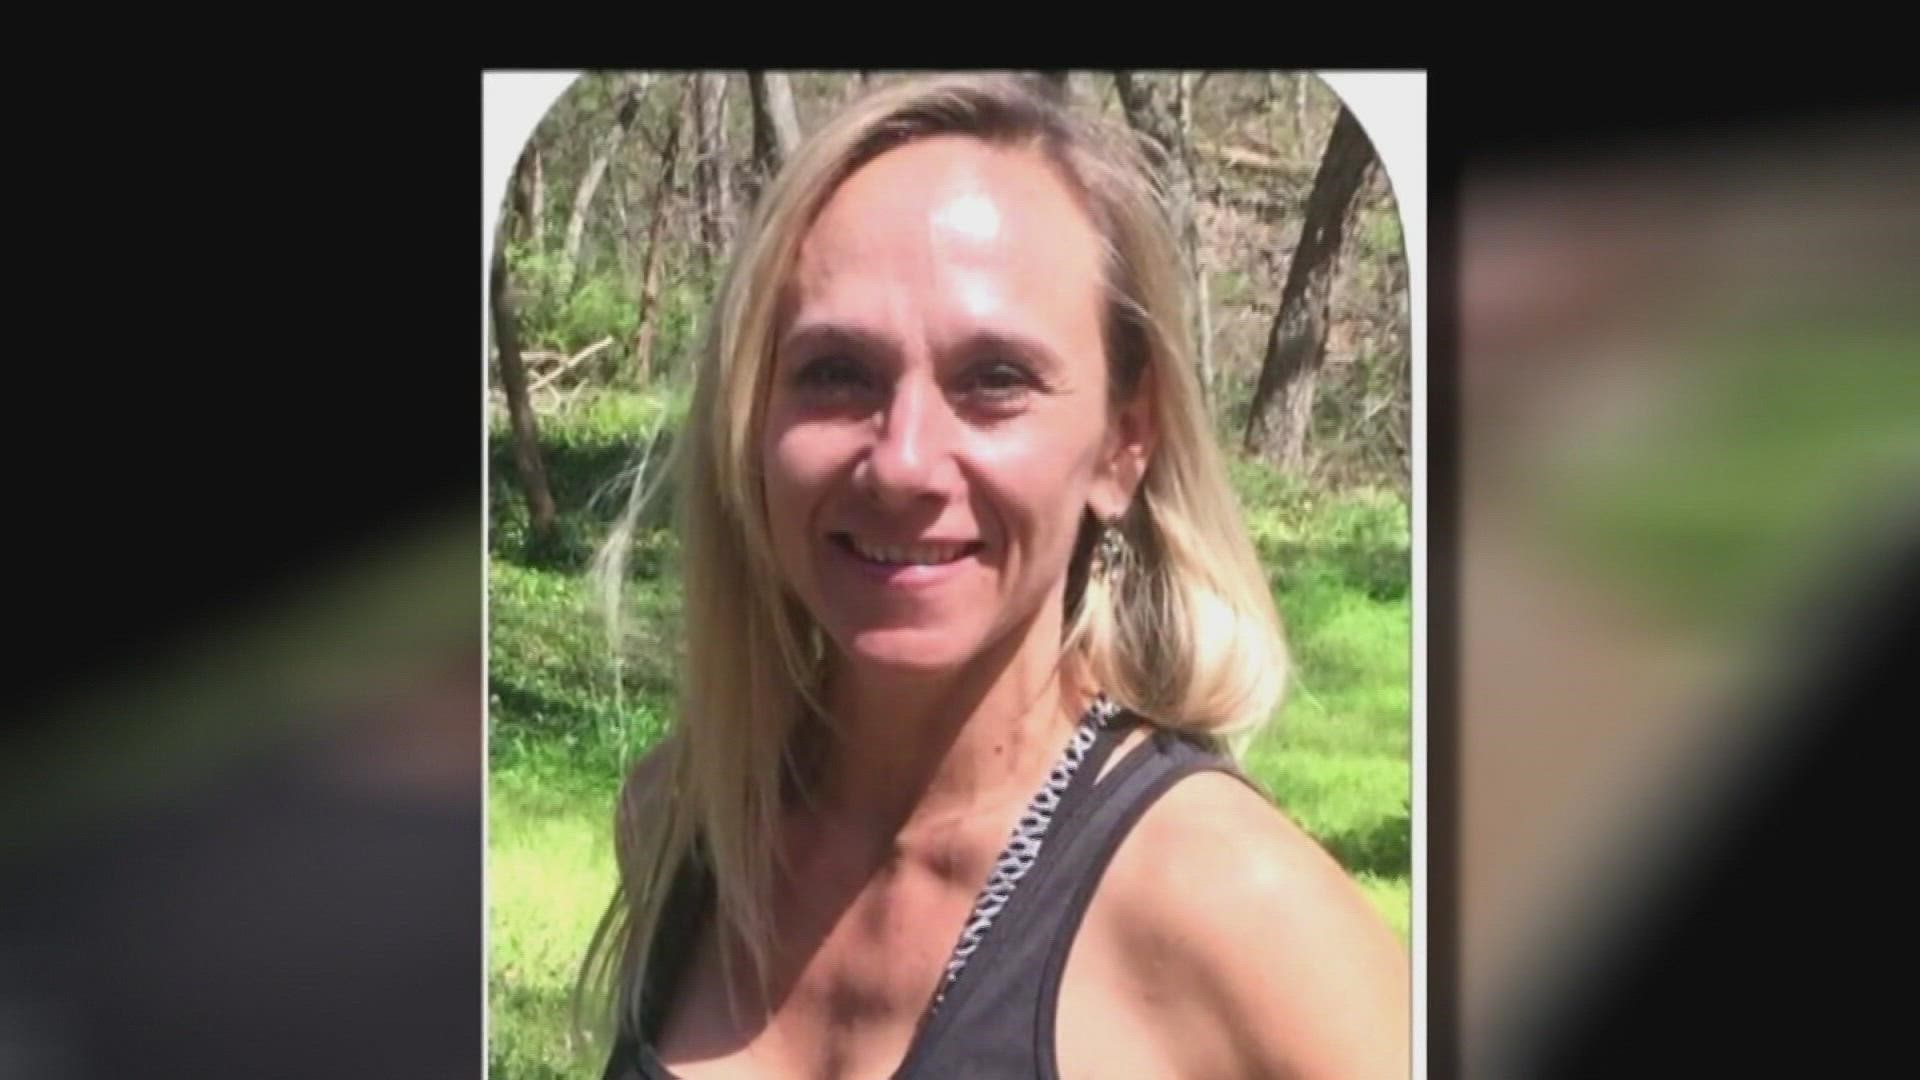 Missy Bevers was planning to teach a fitness class on the morning of April 18, 2016, when she was found dead.